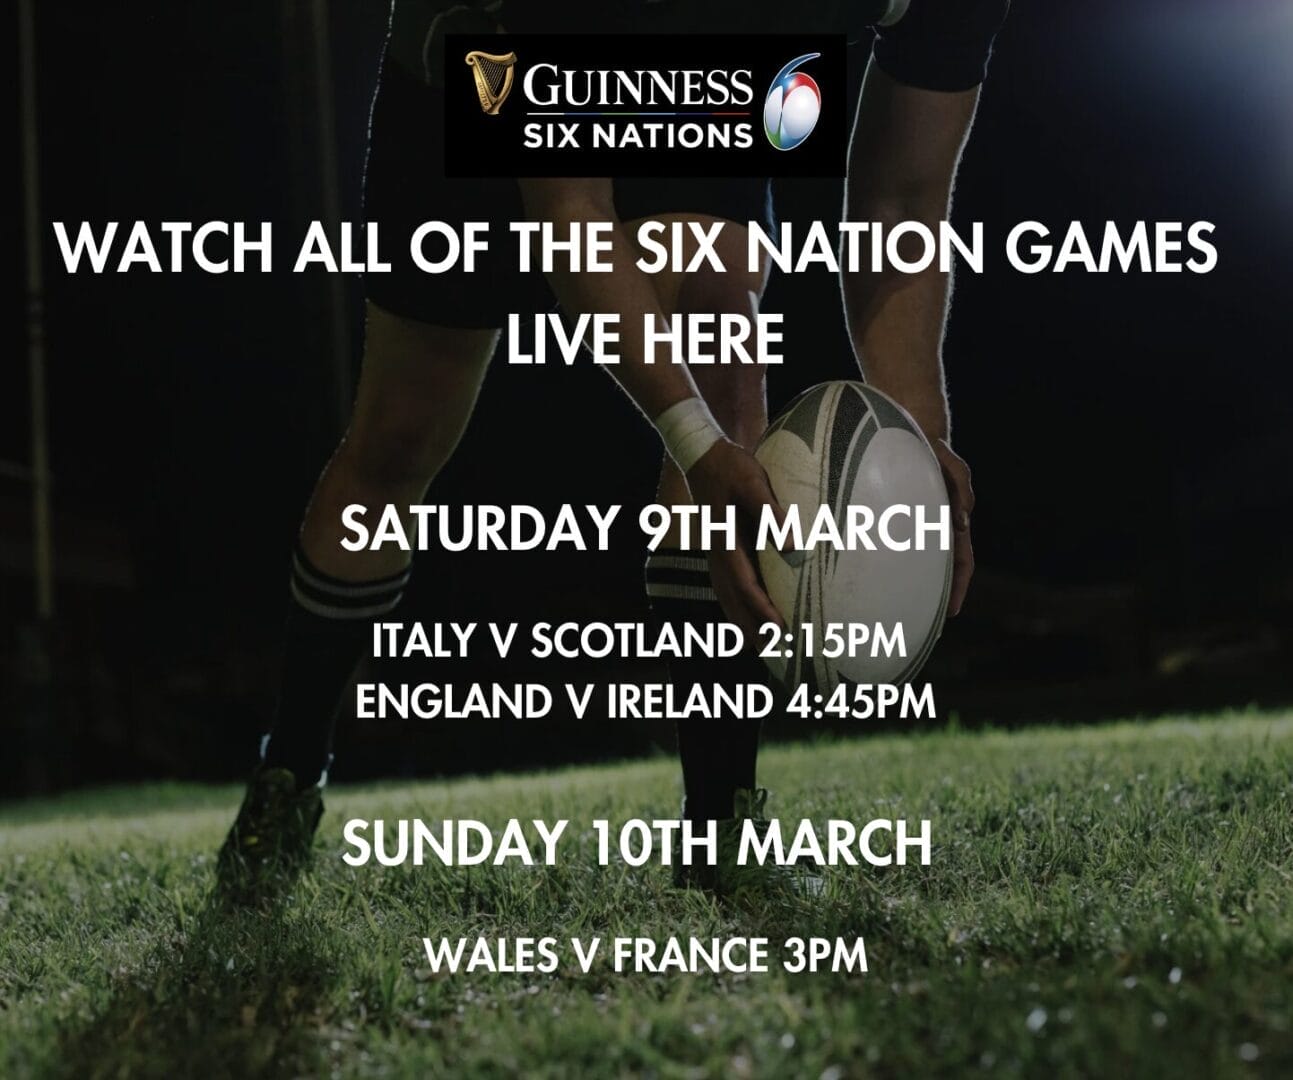 Pubs In Portsmouth With Rugby - Watch All The Action At The Dolphin Old Portsmouth !